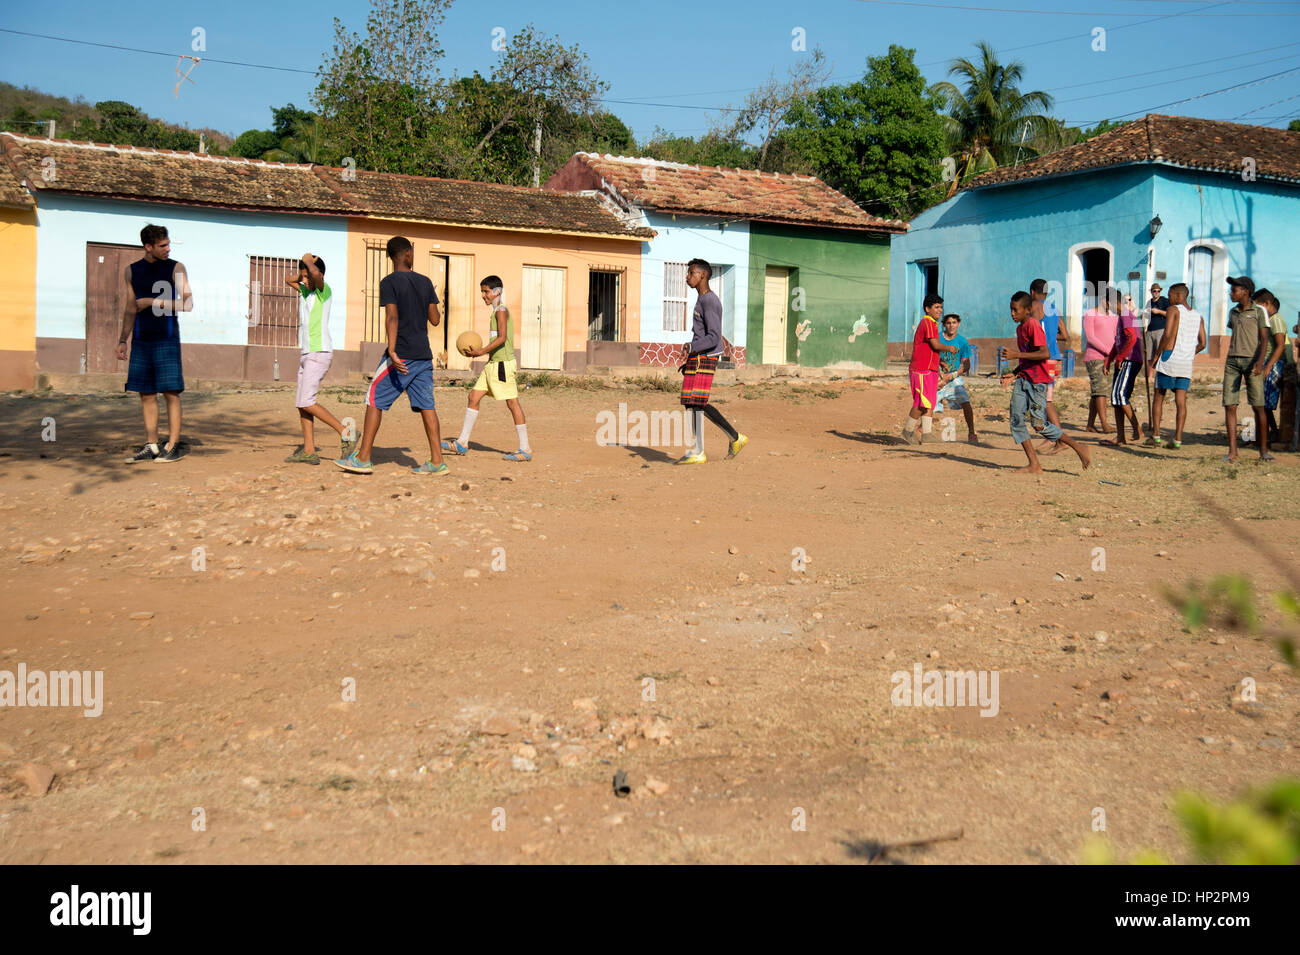 A group of young Cuban boys playing football on a rough ground football pitch in Trinidad Cuba with traditional Trinidad poor housing behind Stock Photo